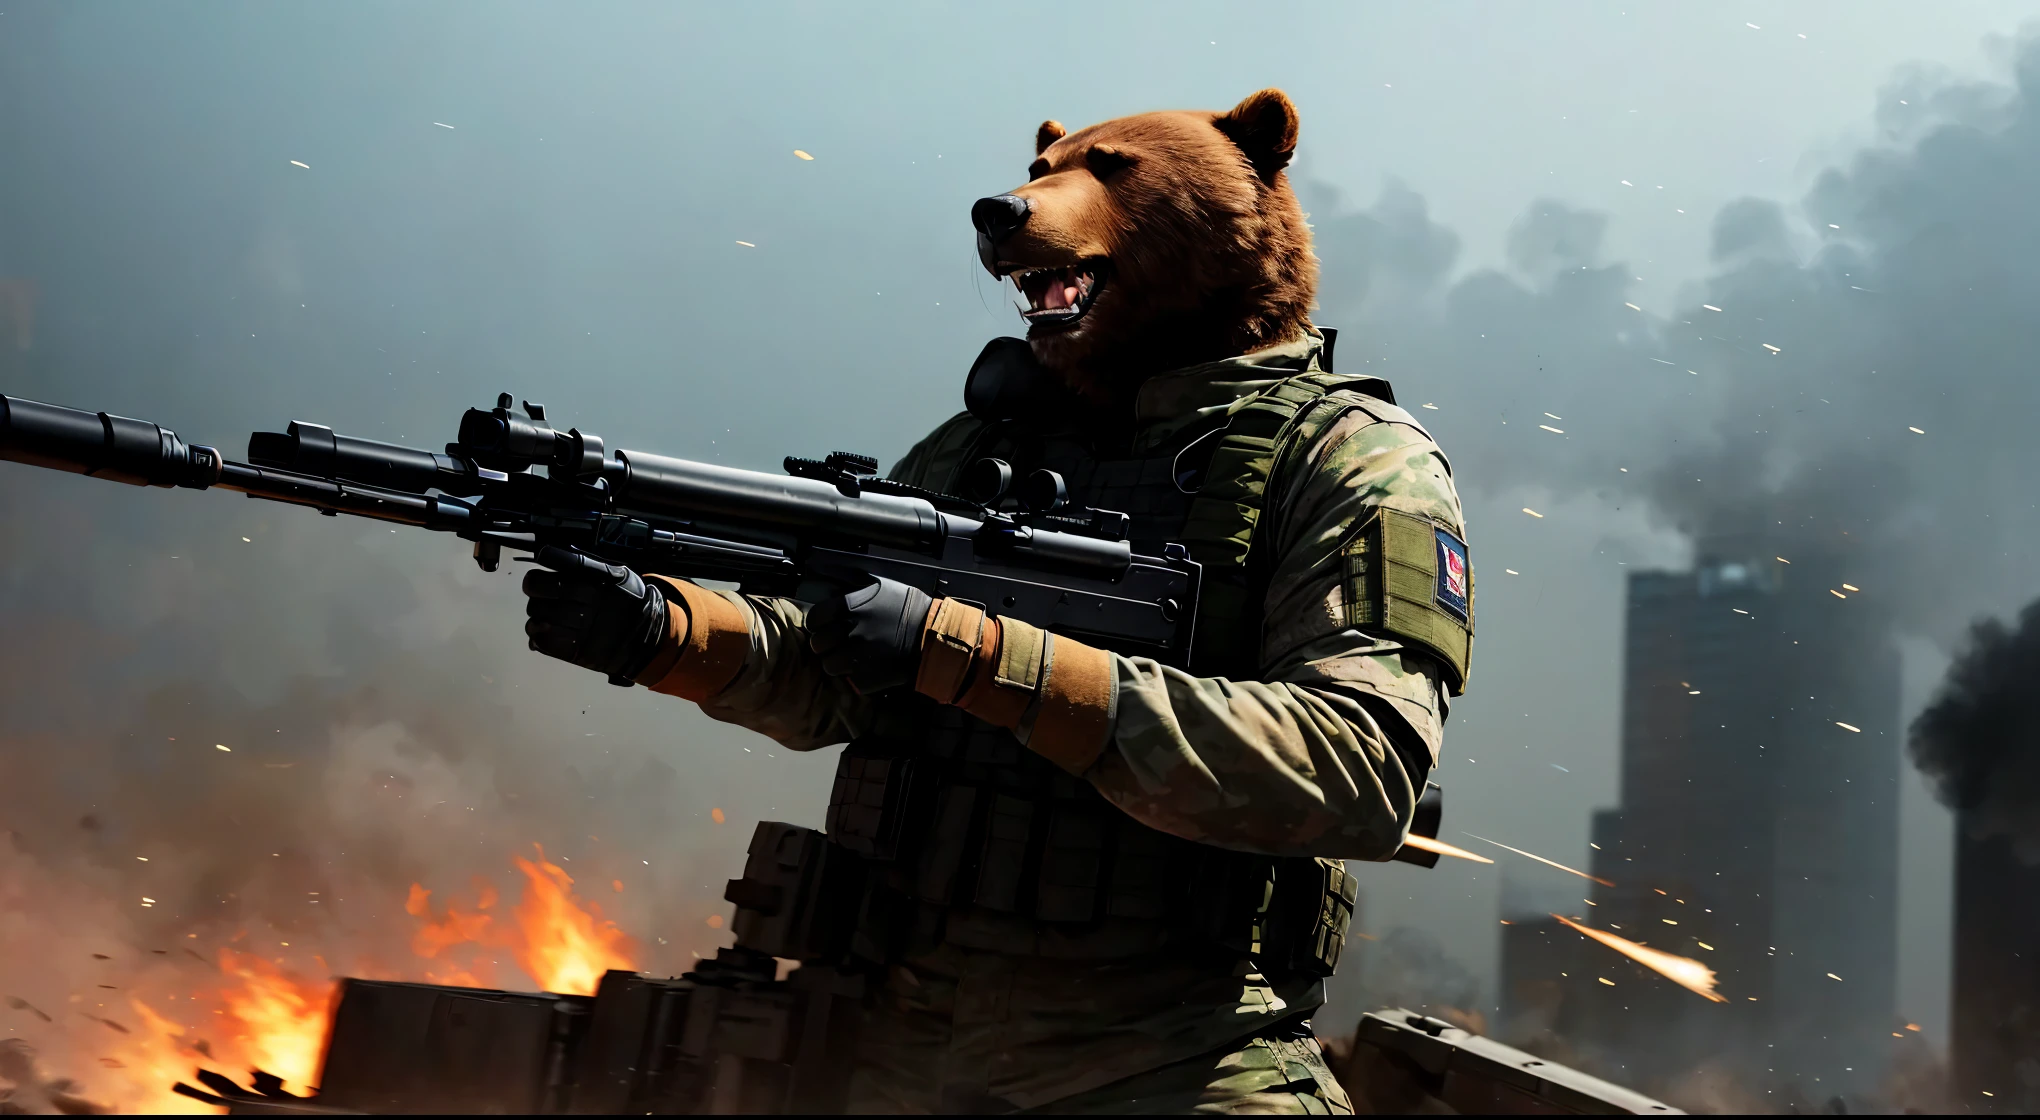 A bear, shooting, machinegun (M249), a bullet belt, (roaring fiercely:1.3), ((feral)), wearing military outfit, long sleeves, elbow pads, ballistic vest, (((tactical gloves))), tactical headset, (motion blur), urban war, ((foreground debris)), (shell casings), foreground shell casings, medium angle, illustrations, best quality, ultra-detailed, realistic:1.37, HDR, vivid colors, portraits, dark color tones, dramatic lighting.